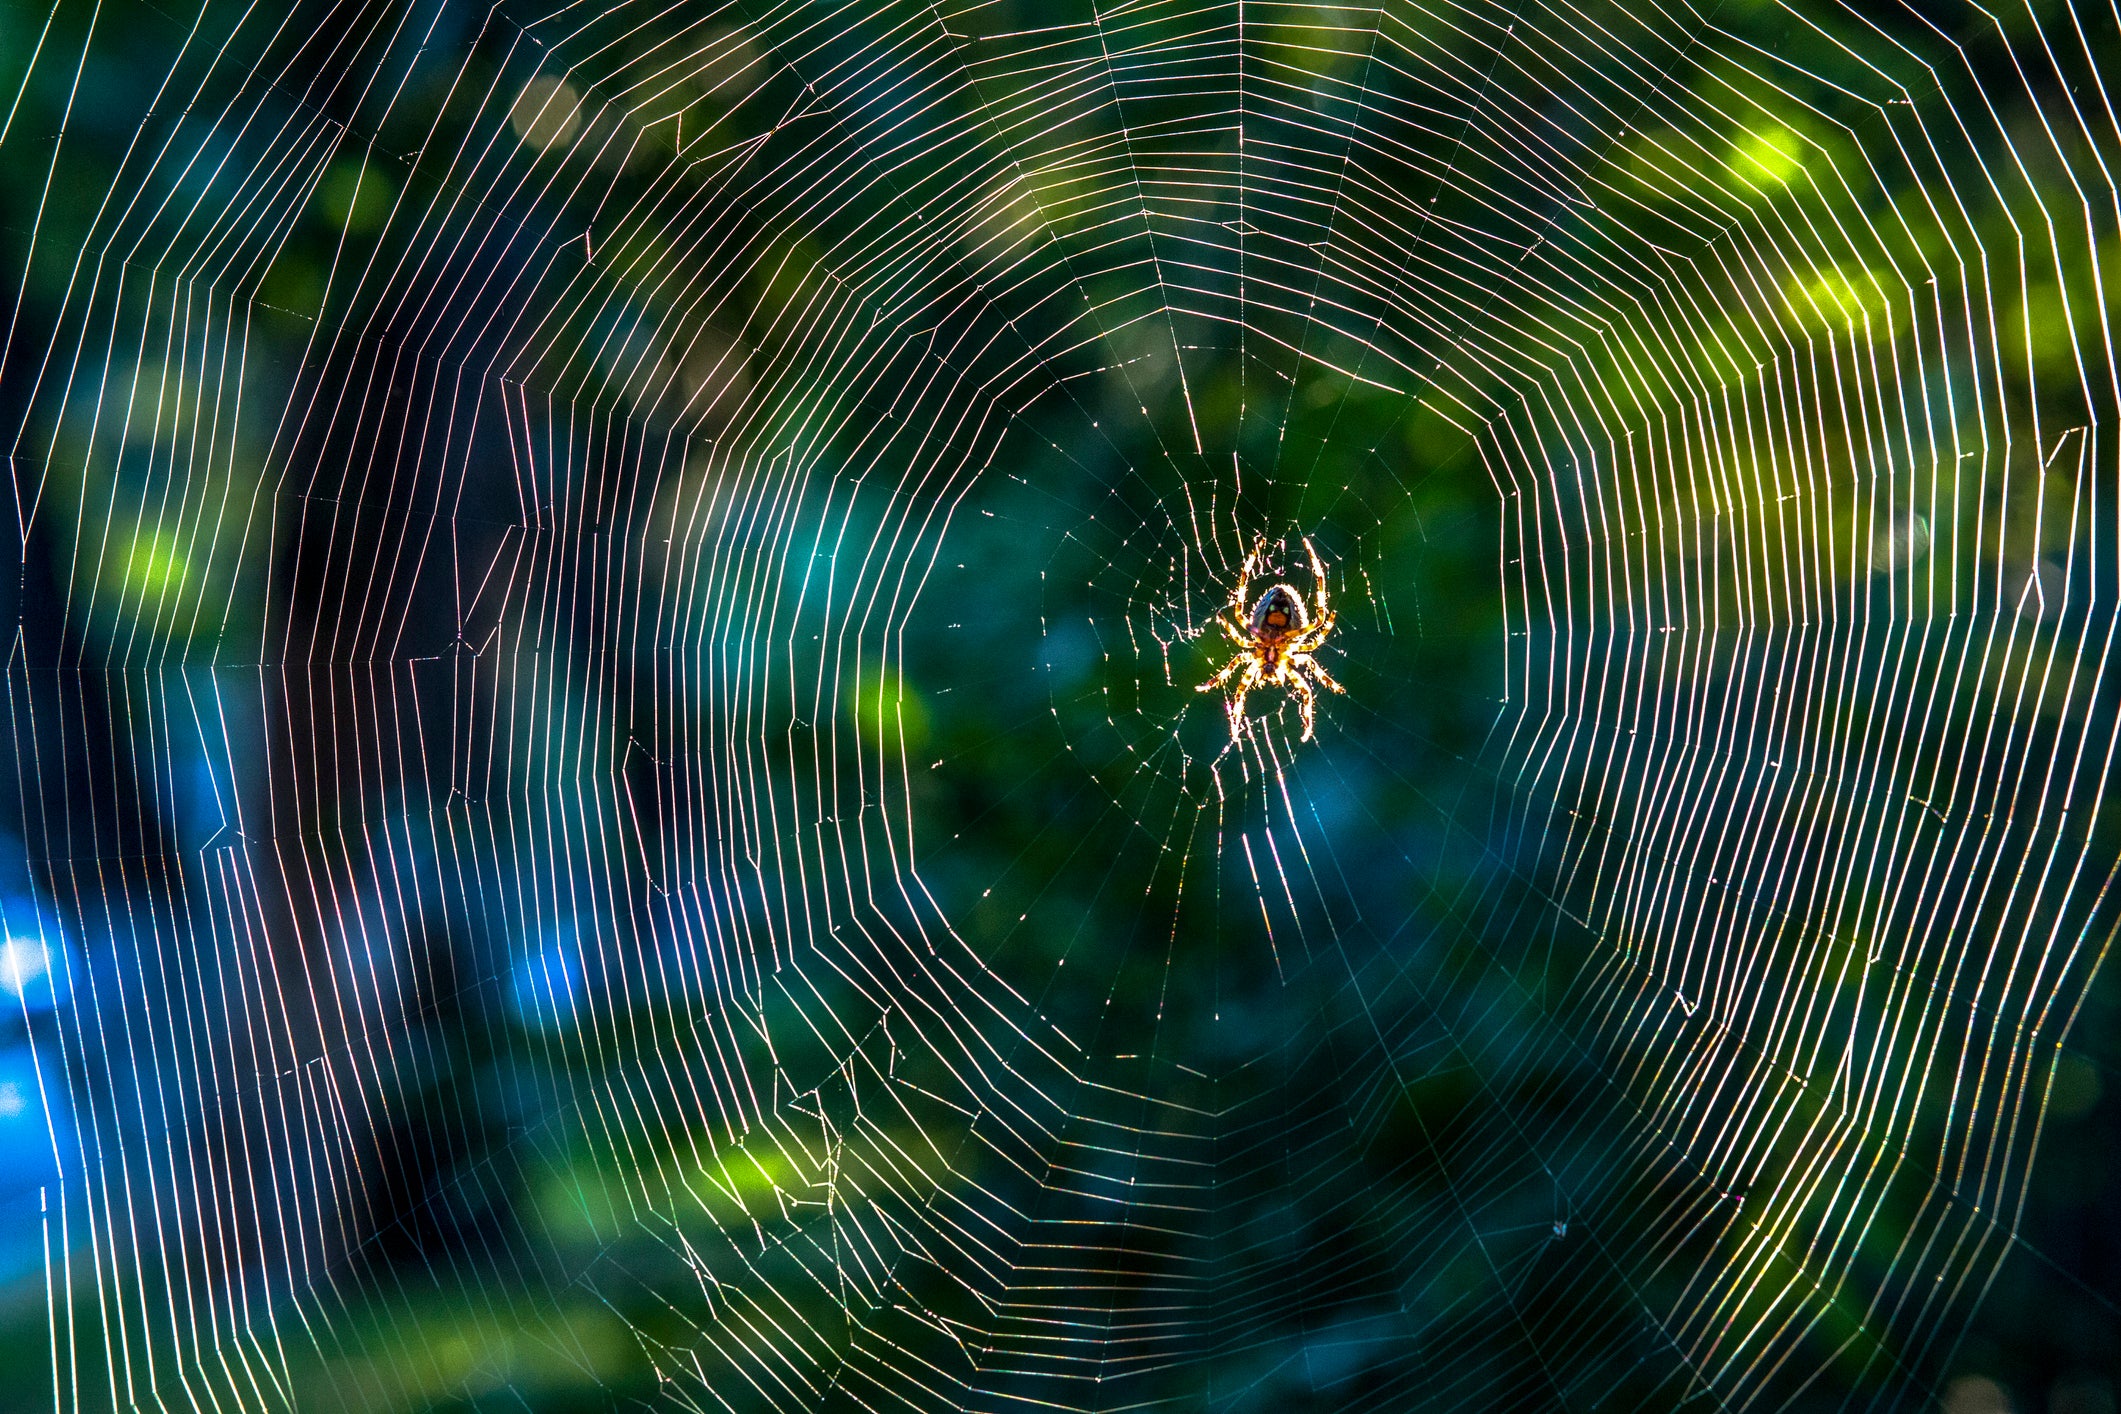 You wouldn’t want to get caught in this arachnid’s web